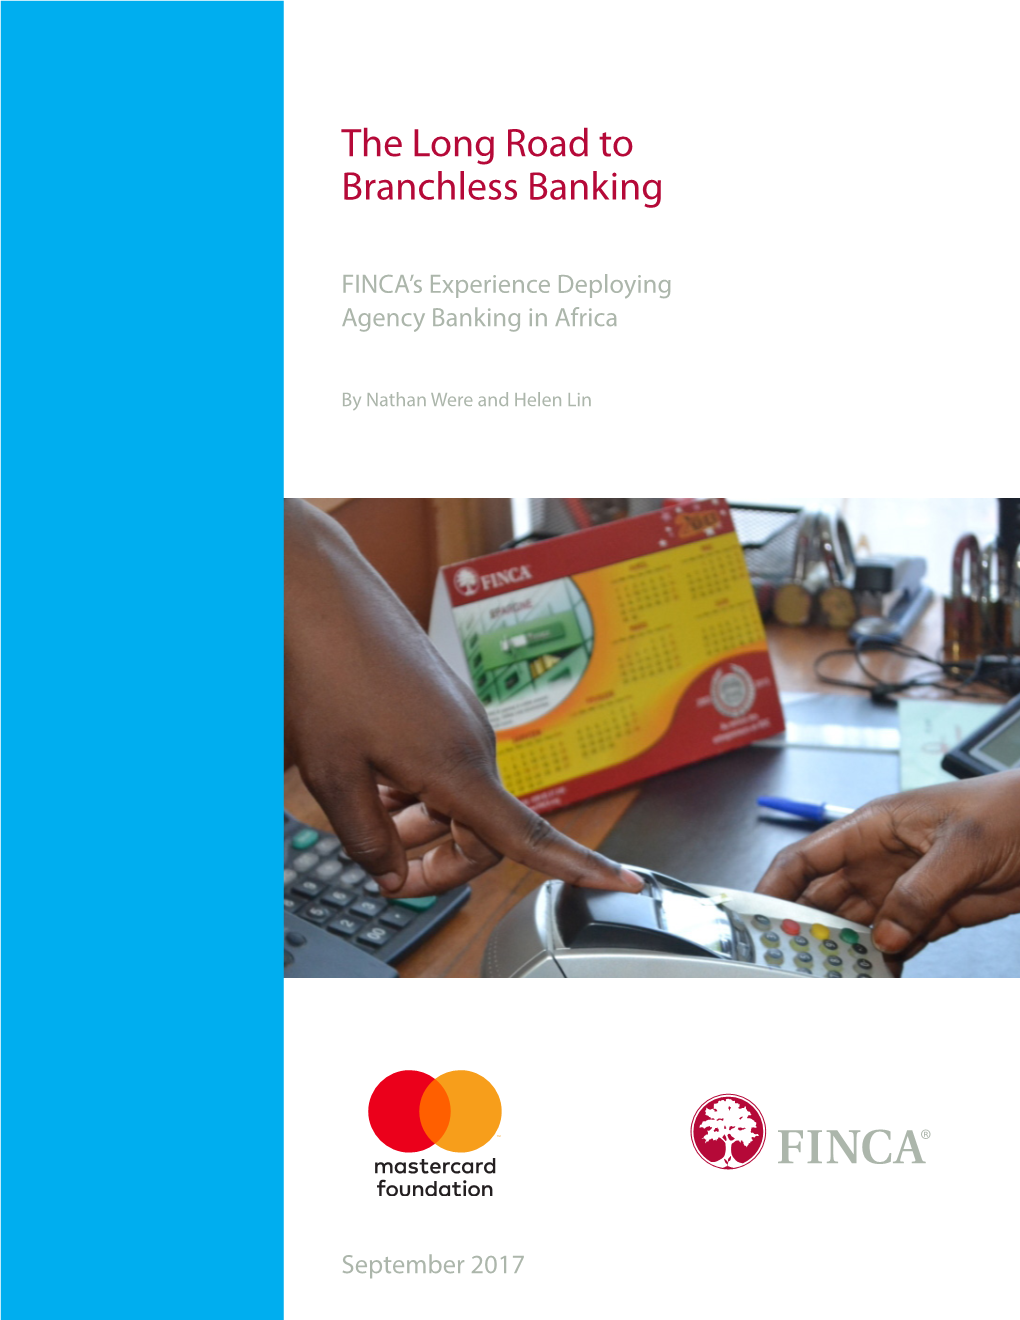 The Long Road to Branchless Banking